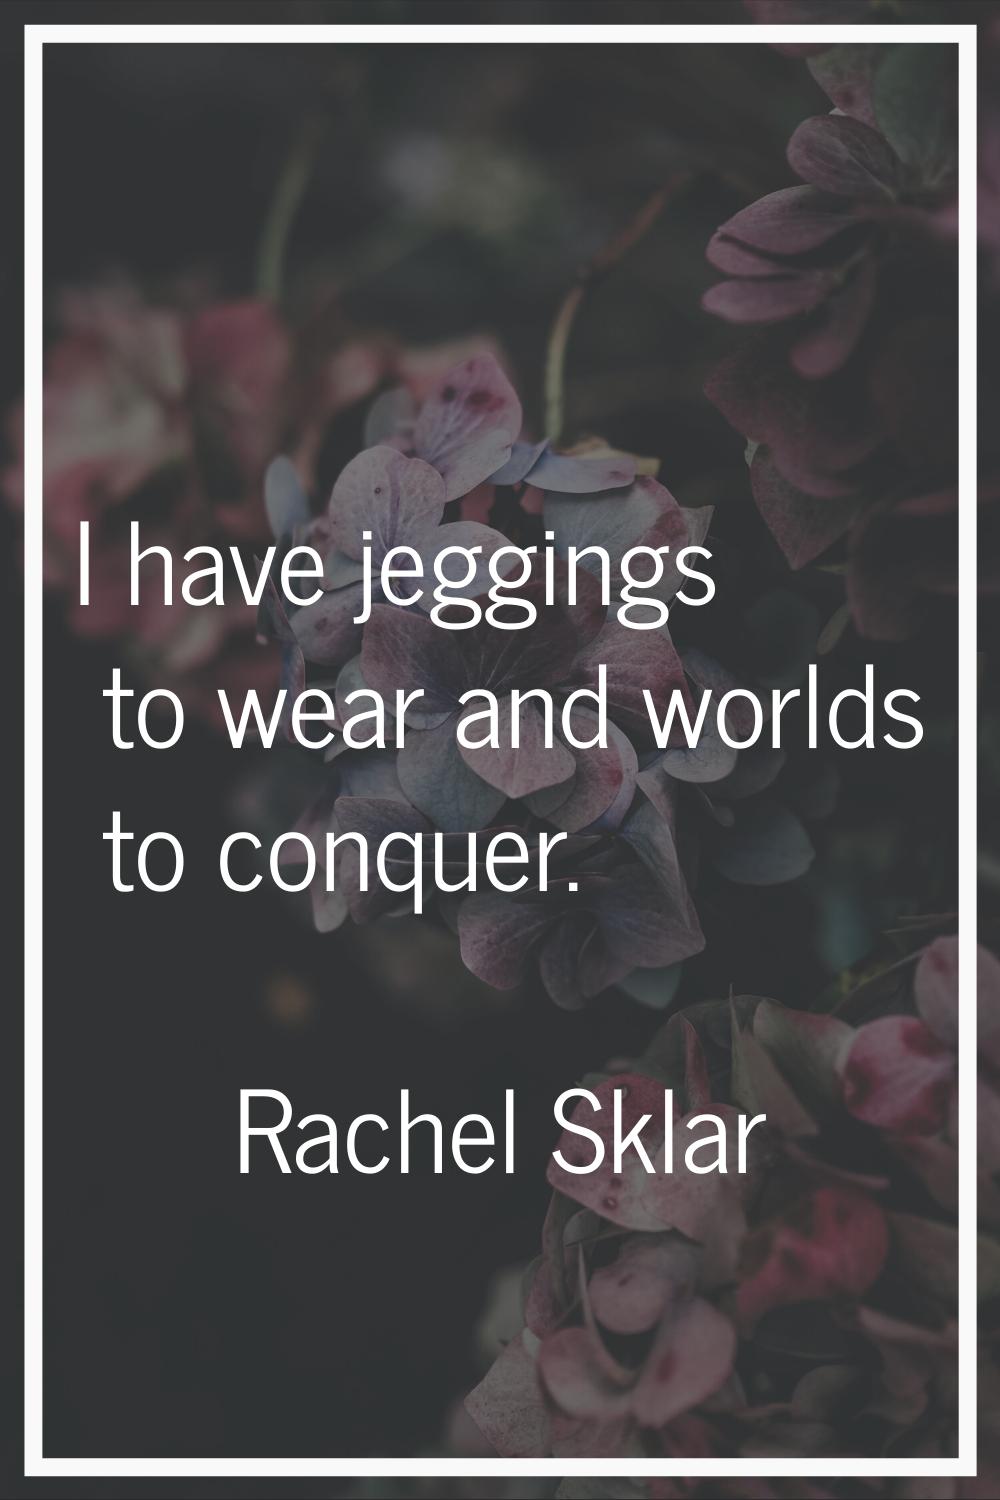 I have jeggings to wear and worlds to conquer.